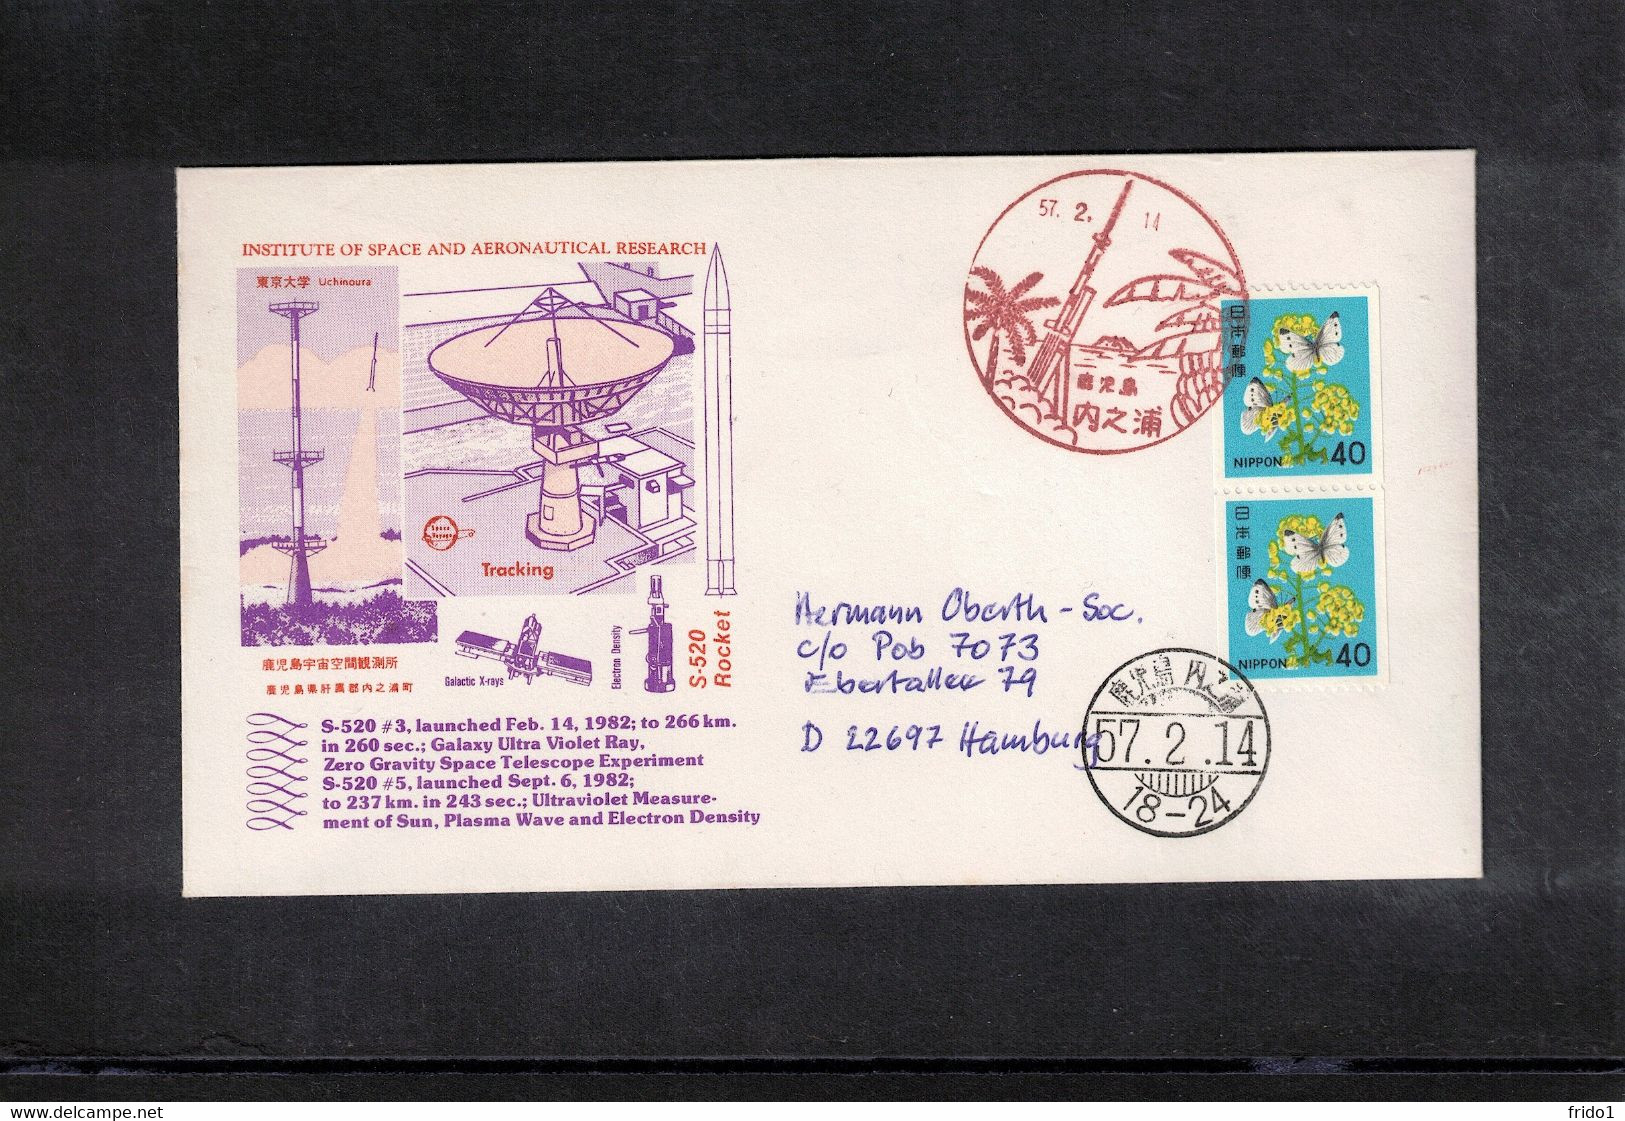 Japan 1982 Space / Raumfahrt Rocket S - 520 Tracking Interesting Cover - Asie